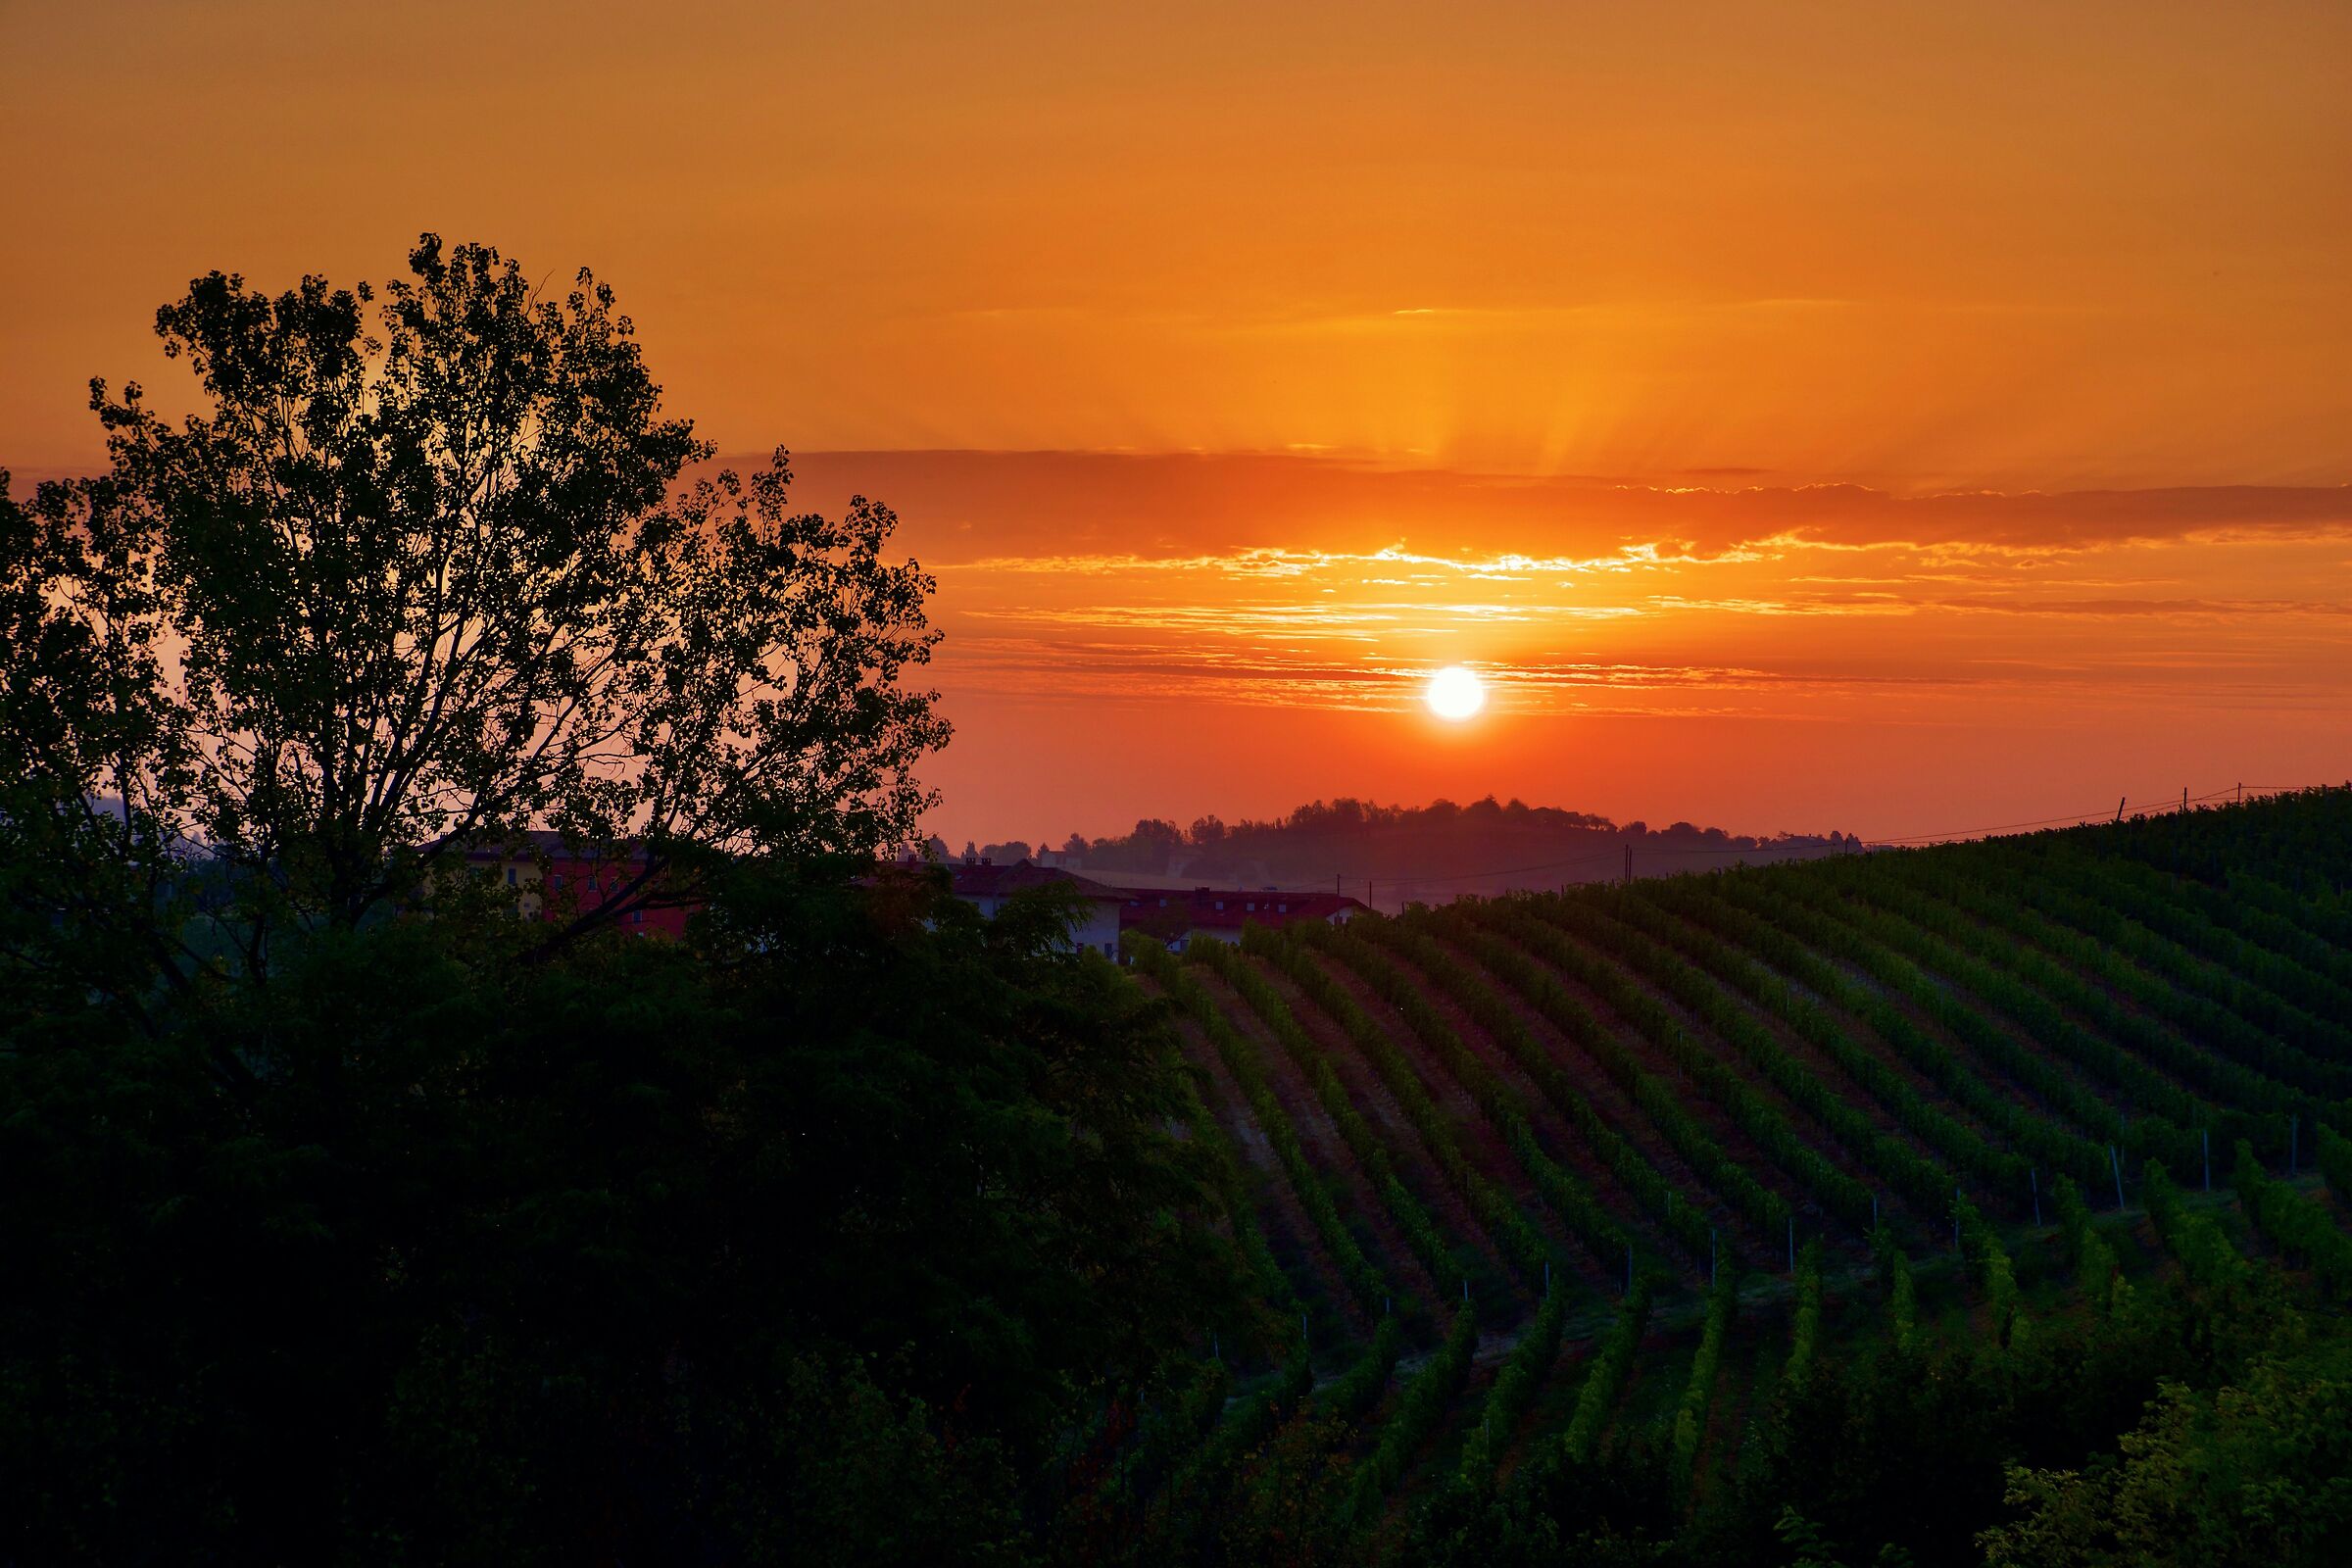 August sunrise over the vineyards...